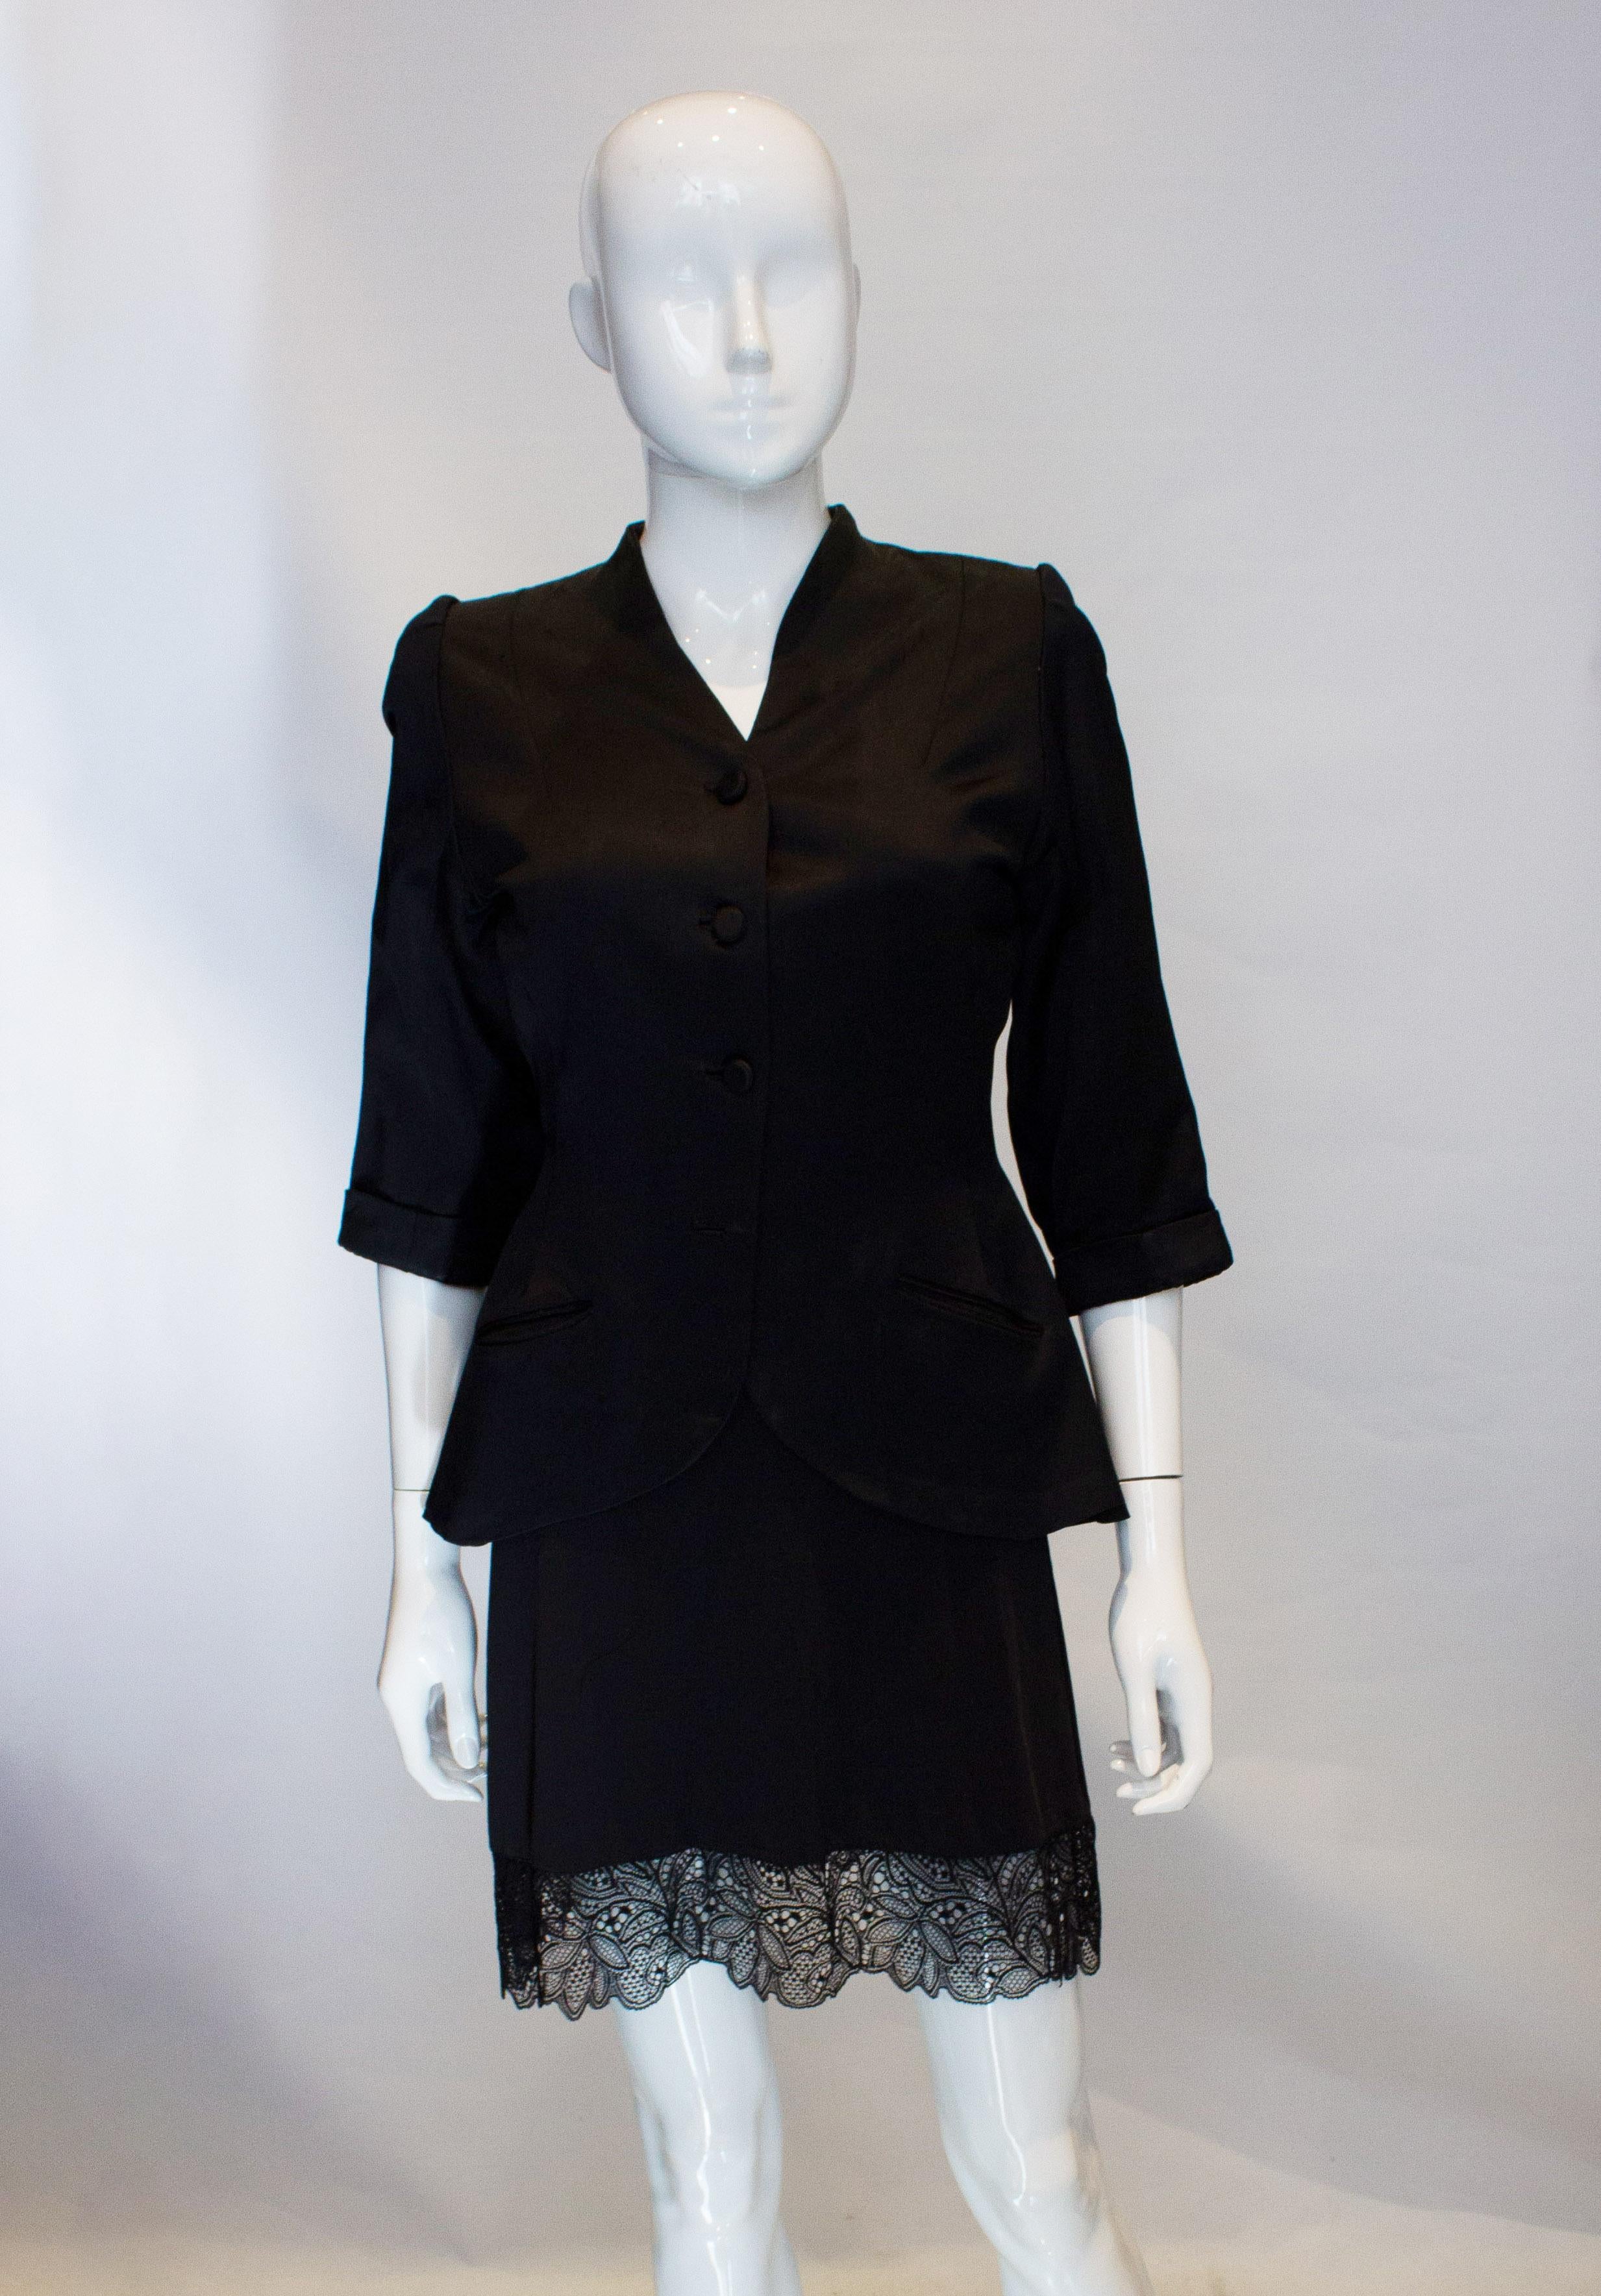 Vintage Black Satin Jacket In Good Condition For Sale In London, GB